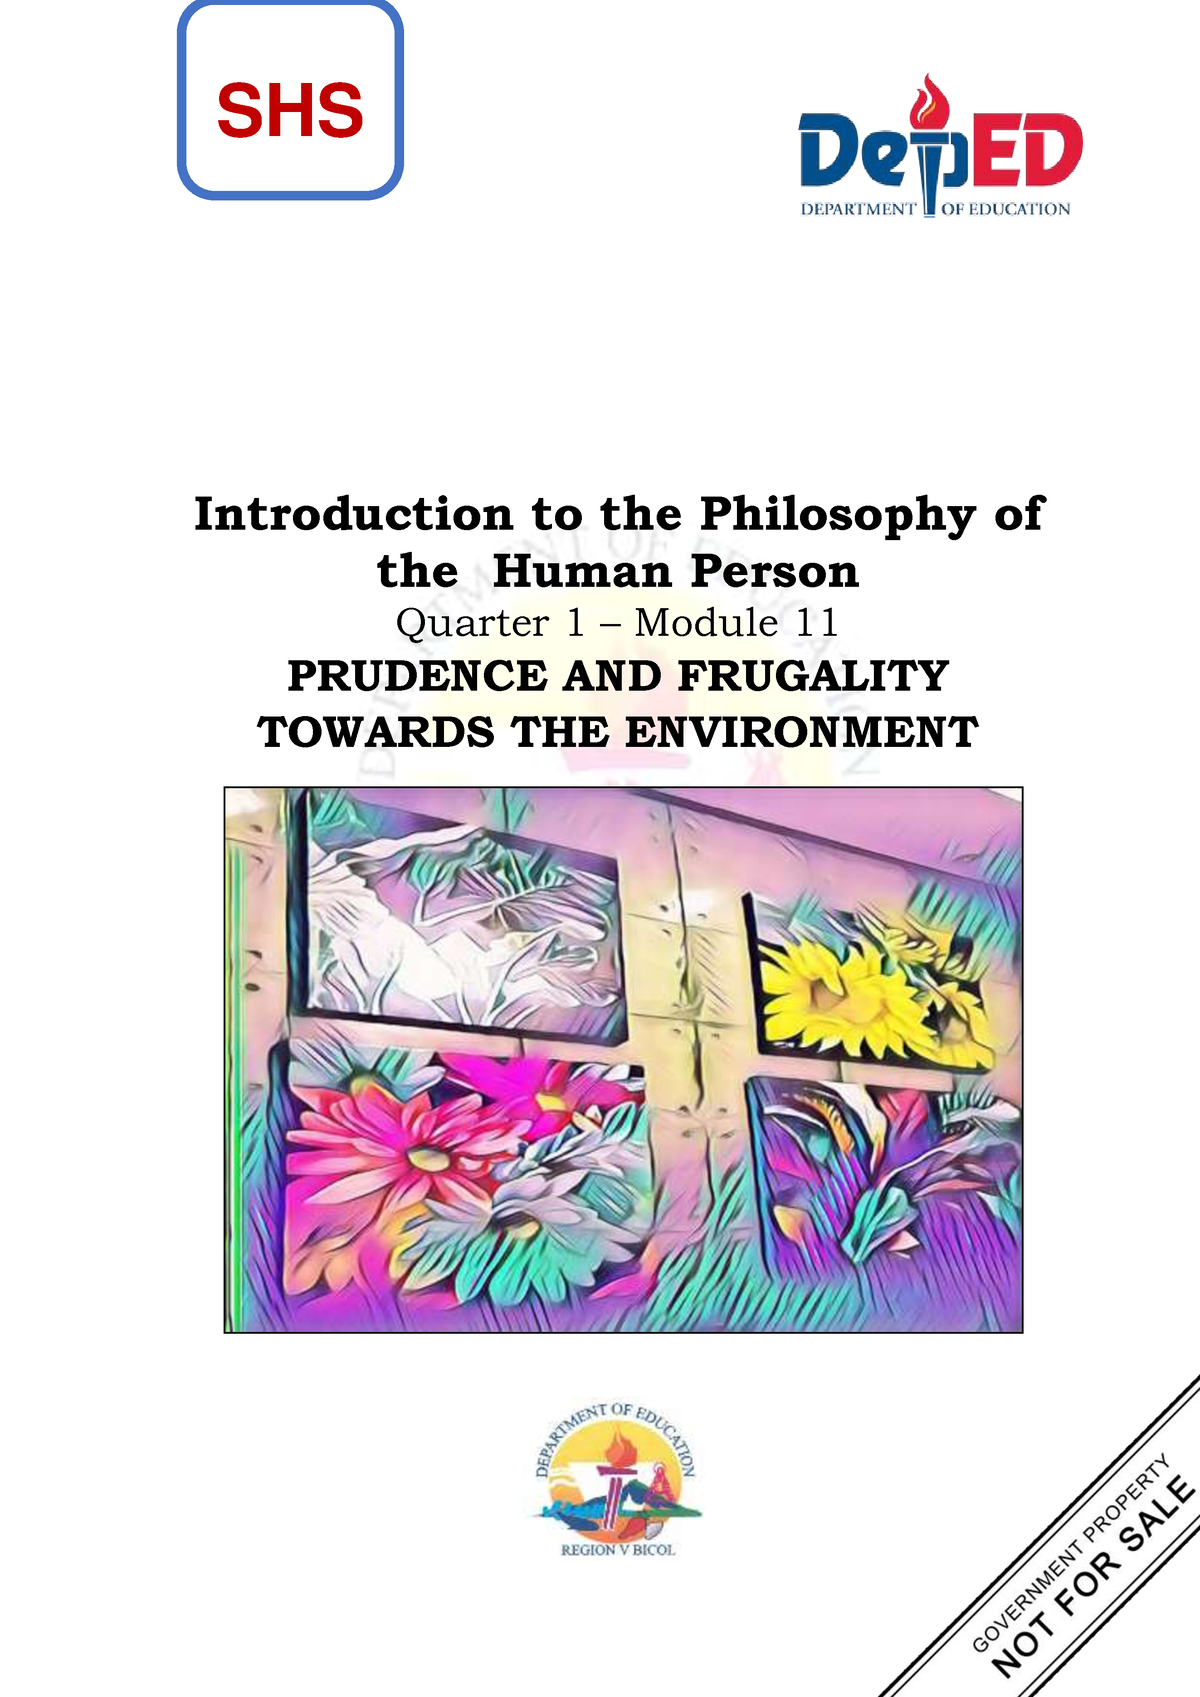 Philo Q1 M11 Modules Introduction To The Philosophy Of The Human Person Quarter 1 Module 9440